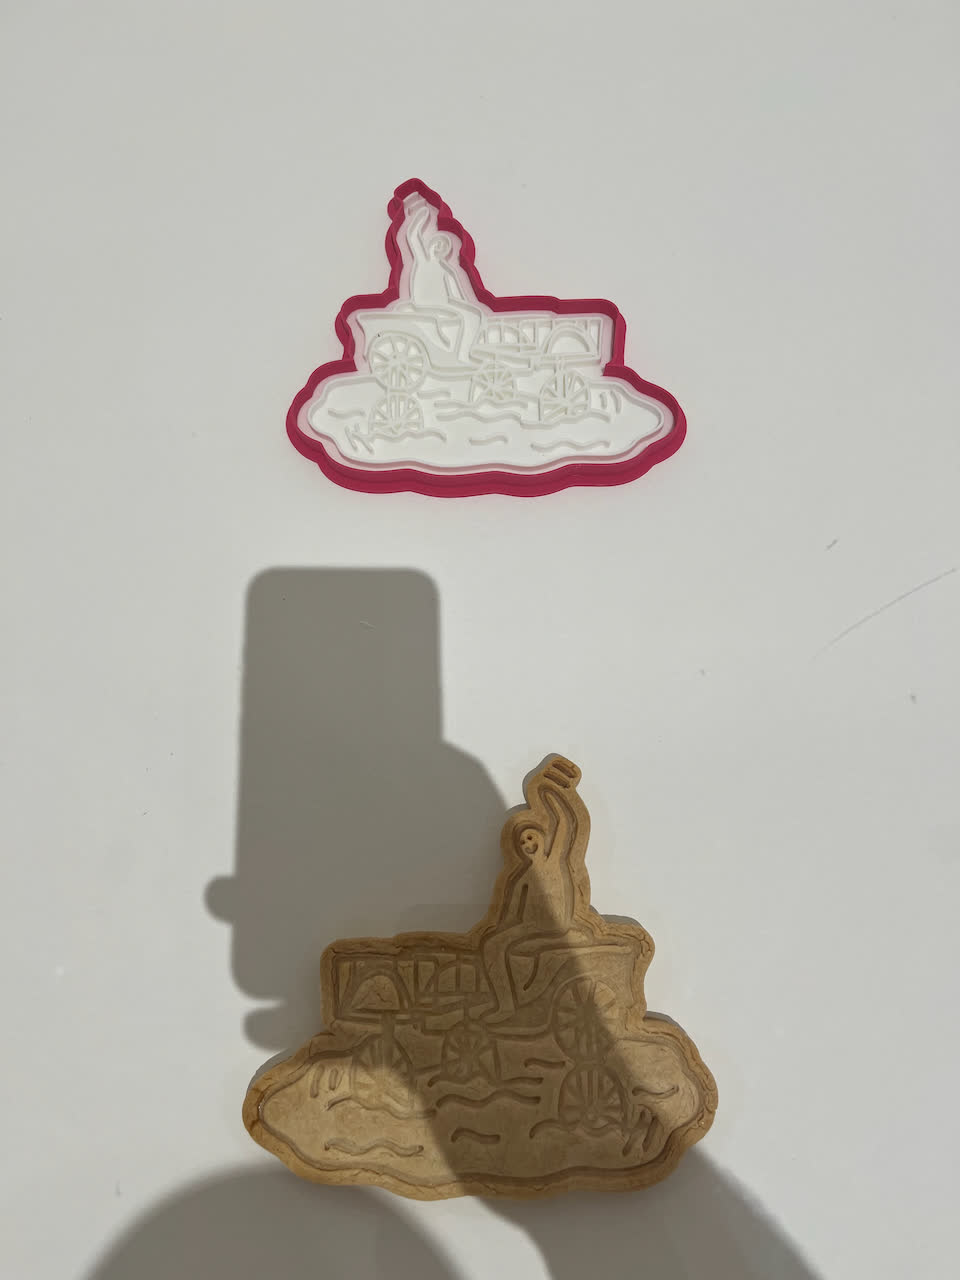 a photo of a biscuit mold made from a cartoon of a person riding a trike through a flood, and beside it the final biscuit